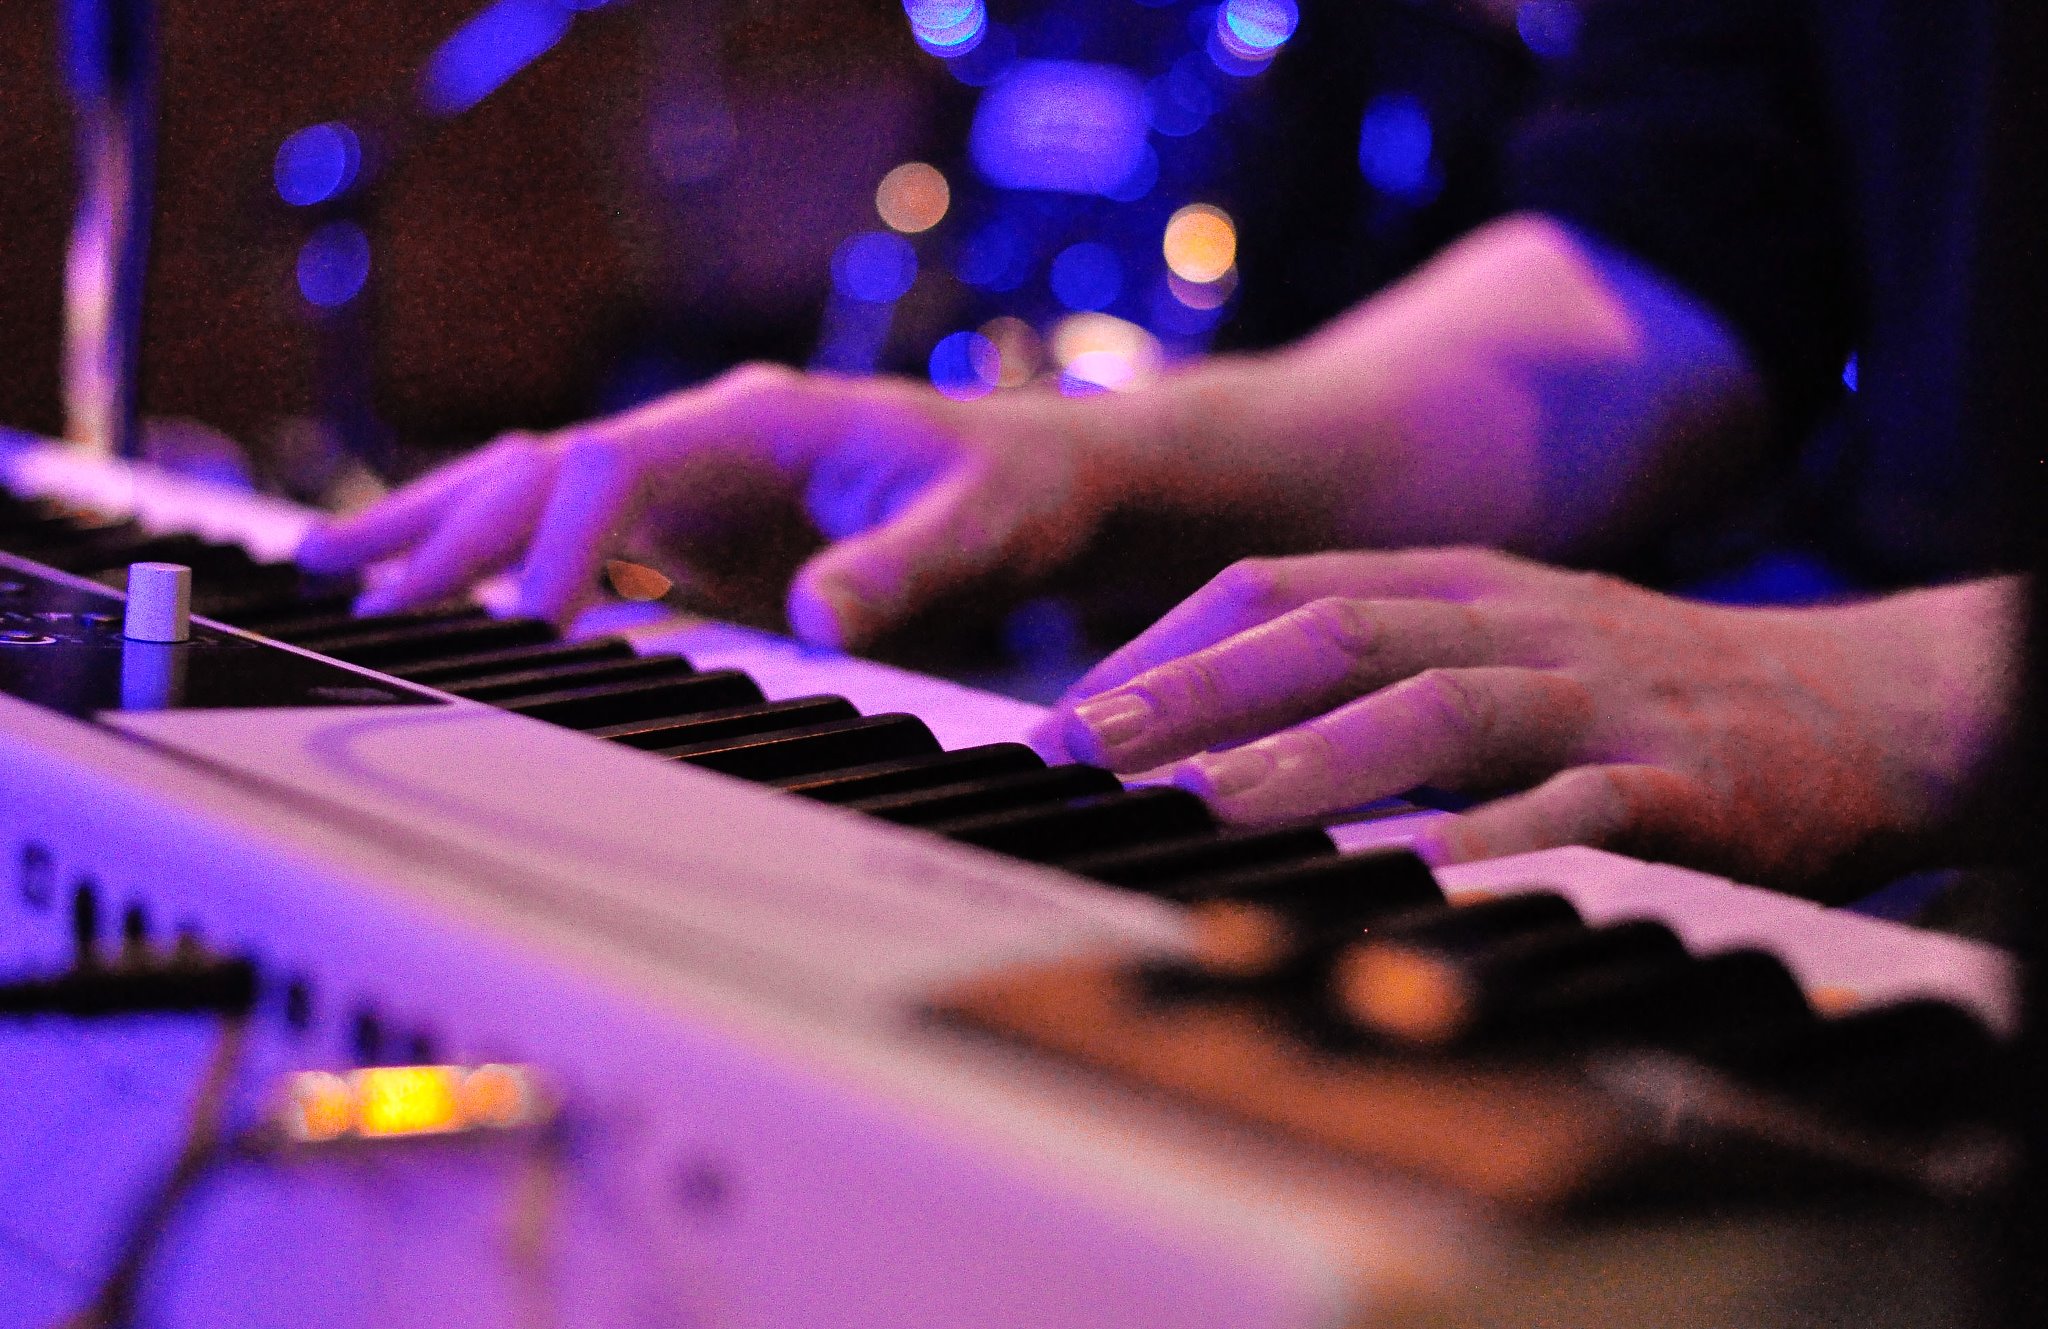 A pair of hands plays a keyboard